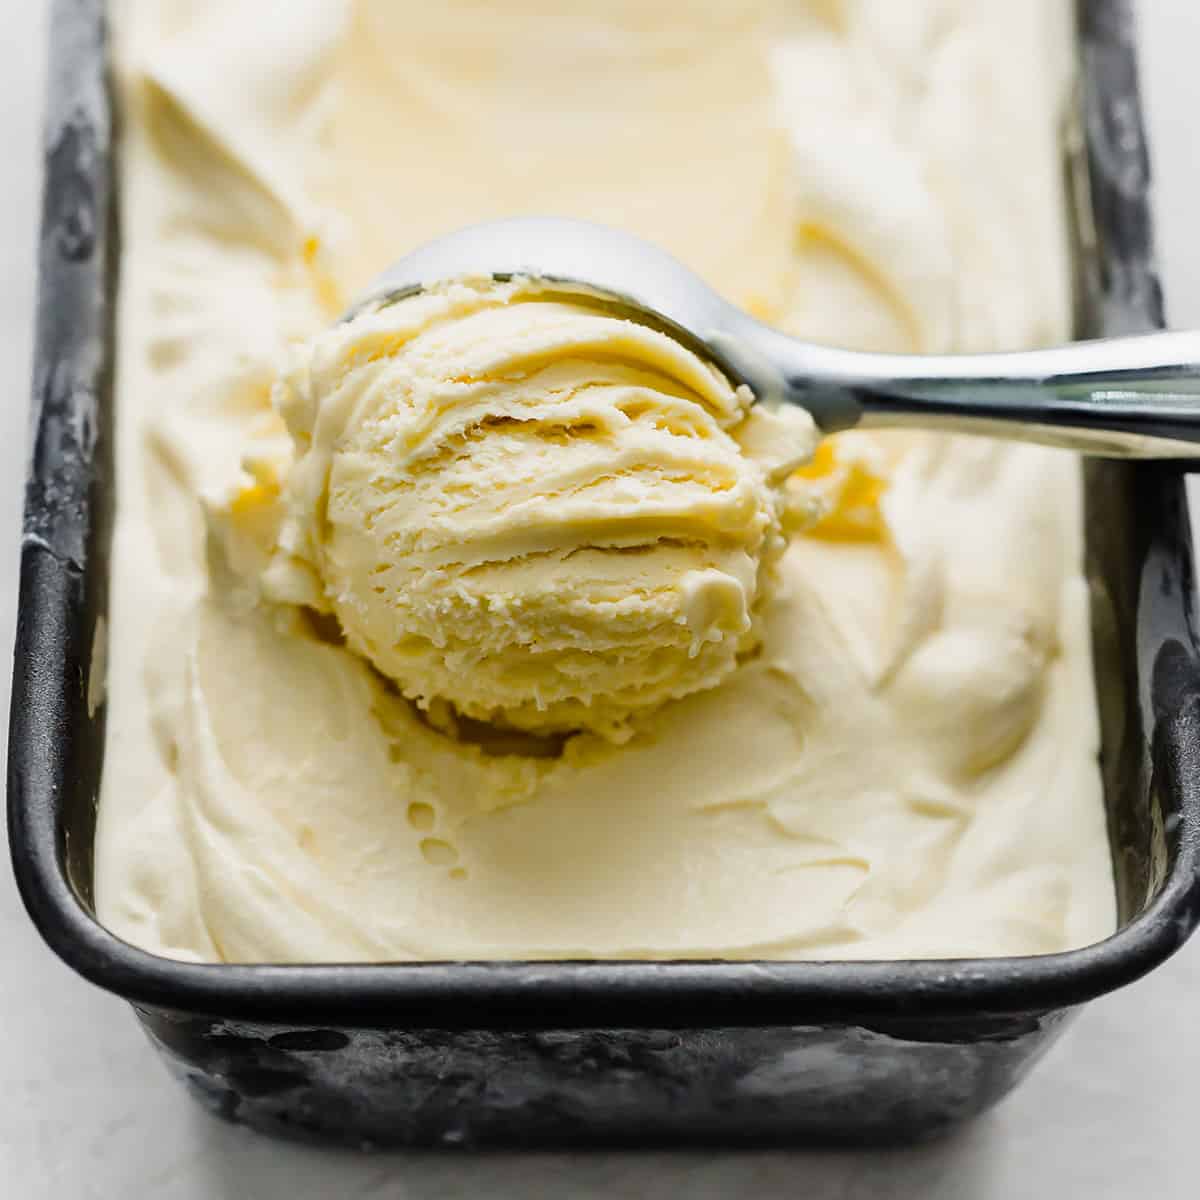 How To Make Vanilla Ice Cream Without An Ice Cream Maker